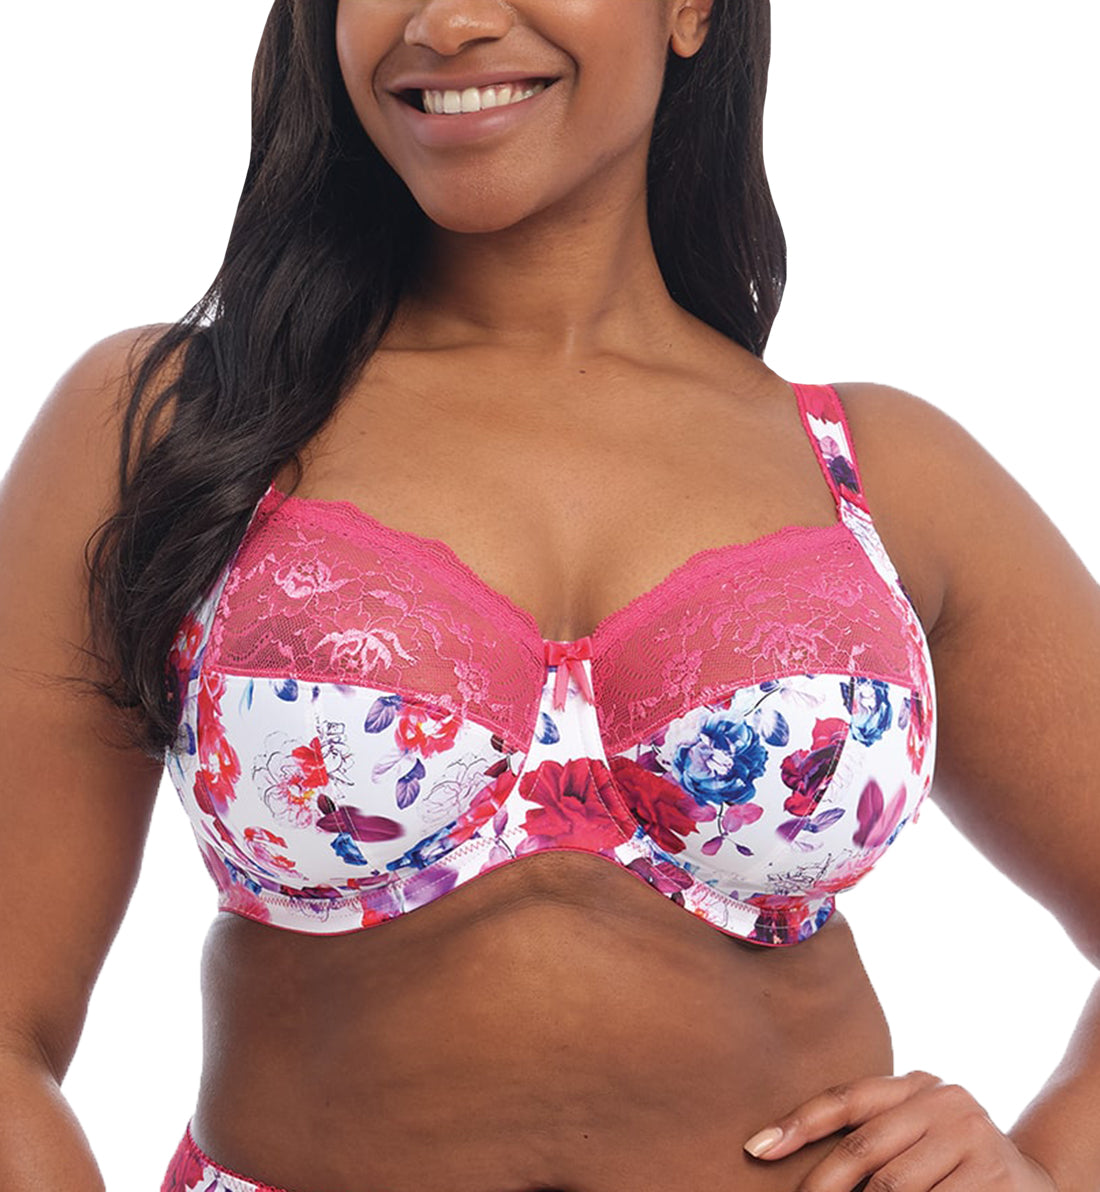 Elomi Morgan Stretch Lace Banded Underwire Bra (4110),32GG,Pink Floral - Pink Floral,32GG